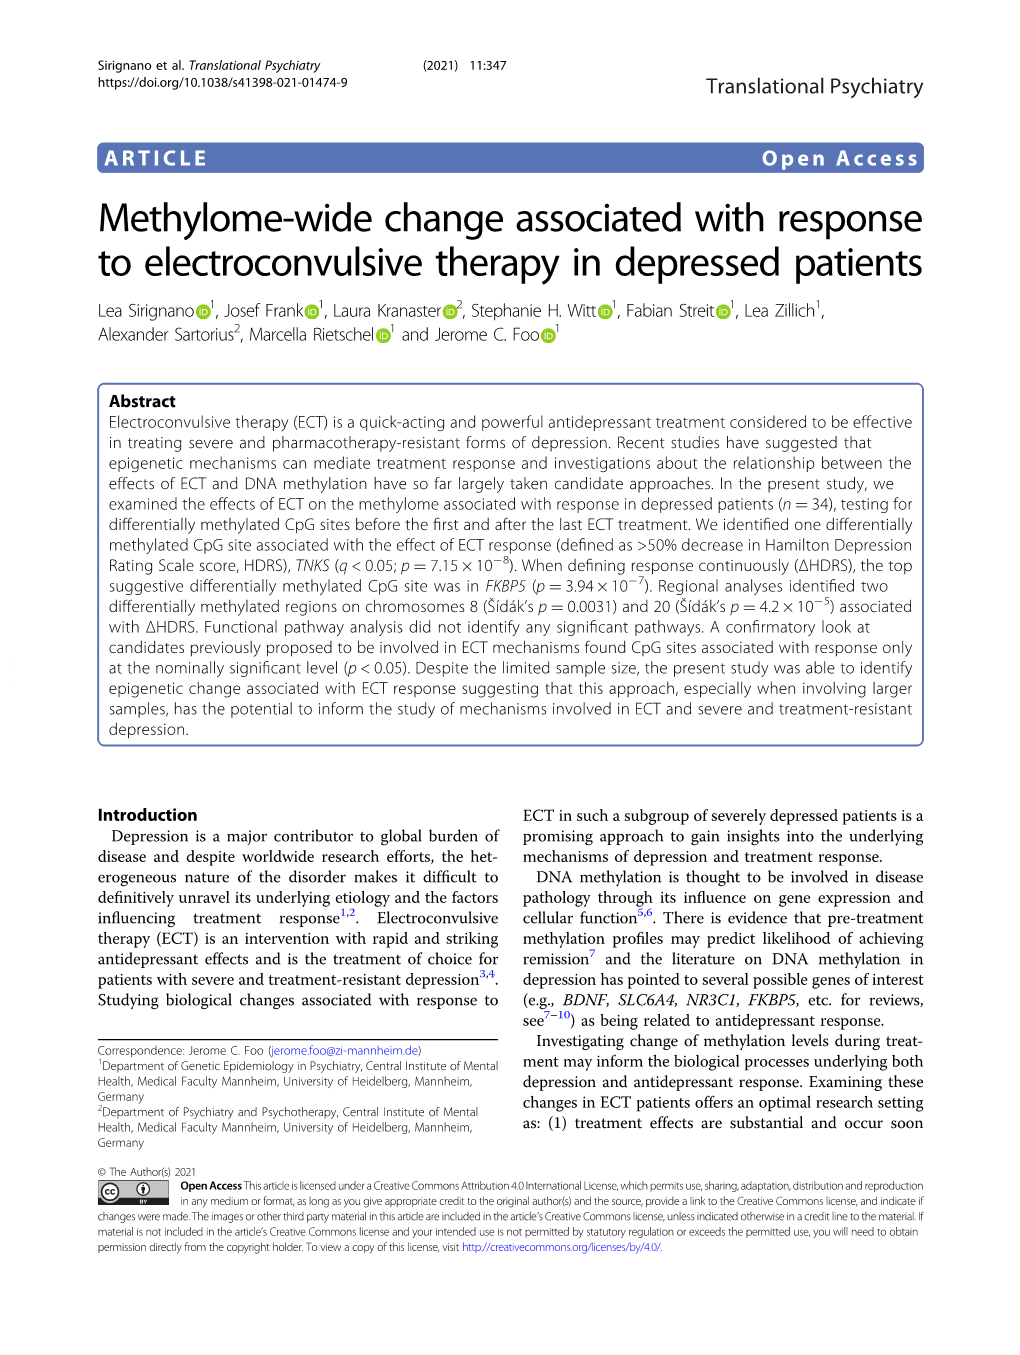 Methylome-Wide Change Associated with Response to Electroconvulsive Therapy in Depressed Patients Lea Sirignano 1,Joseffrank 1, Laura Kranaster 2, Stephanie H